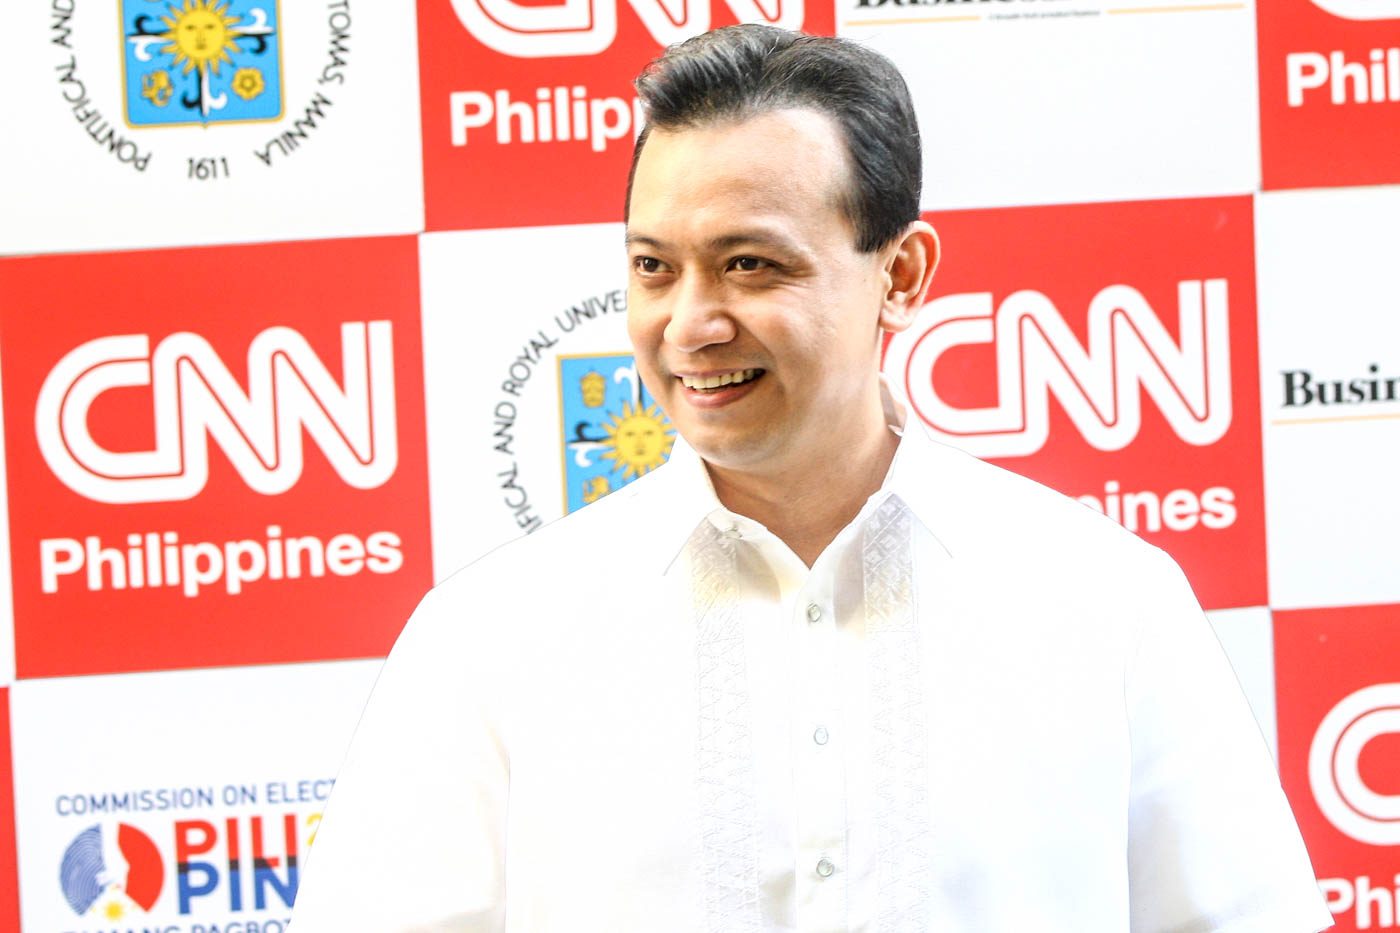 GETTING TO KNOW. Senator Antonio Trillanes IV says the debate was a good venue for candidates to introduce themselves to the voters. Photo by Ben Nabong/Rappler  